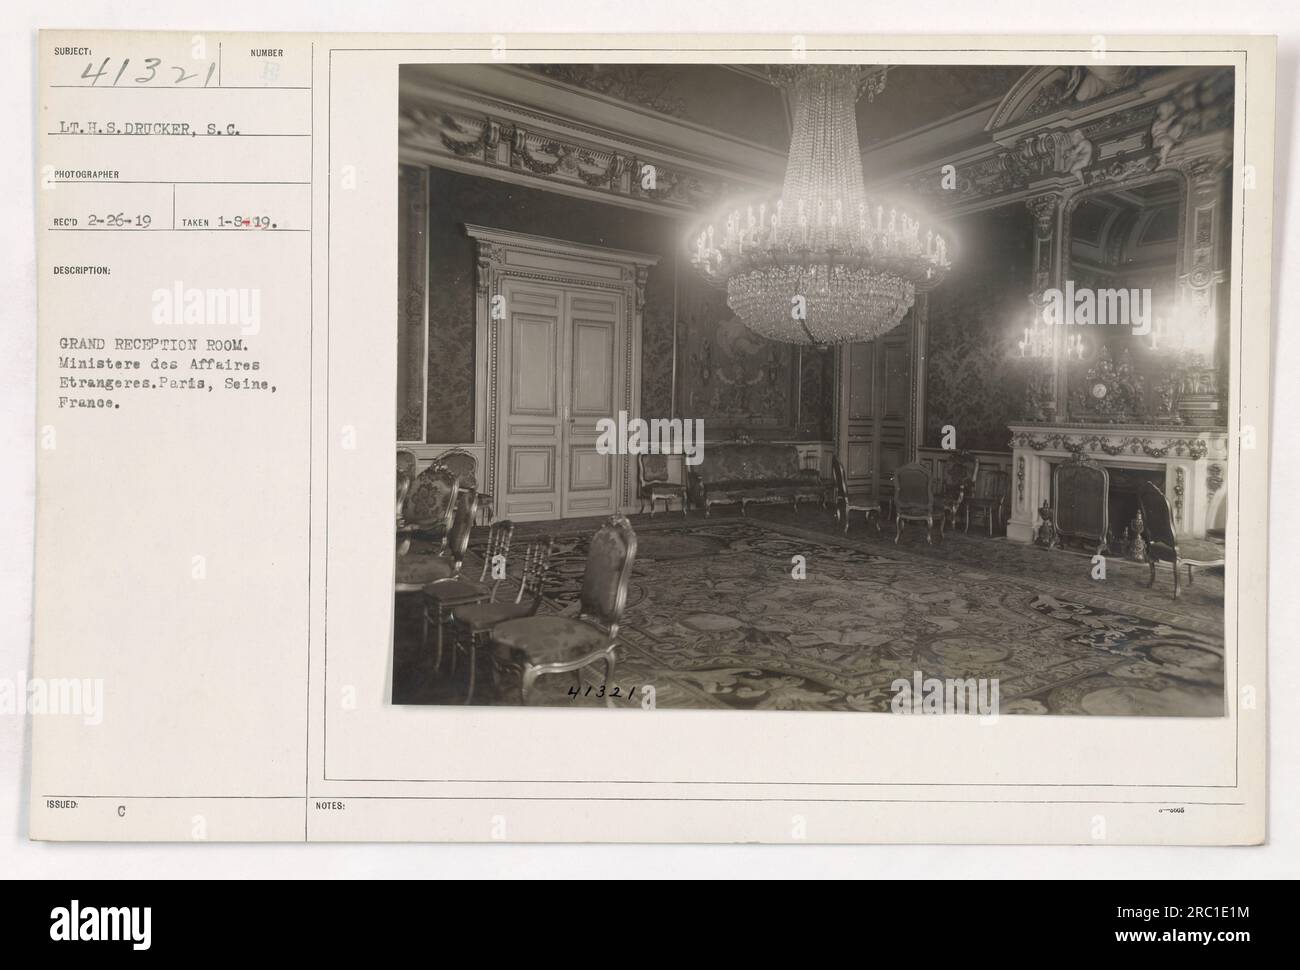 Lieutenant H.S. Drucker, a photographer from the Signal Corps, captured this image on January 8, 1919, in the Grand Reception Room of the Ministere des Affaires Etrangeres in Paris, France. The purpose of capturing this scene is not specified in the provided information. Stock Photo